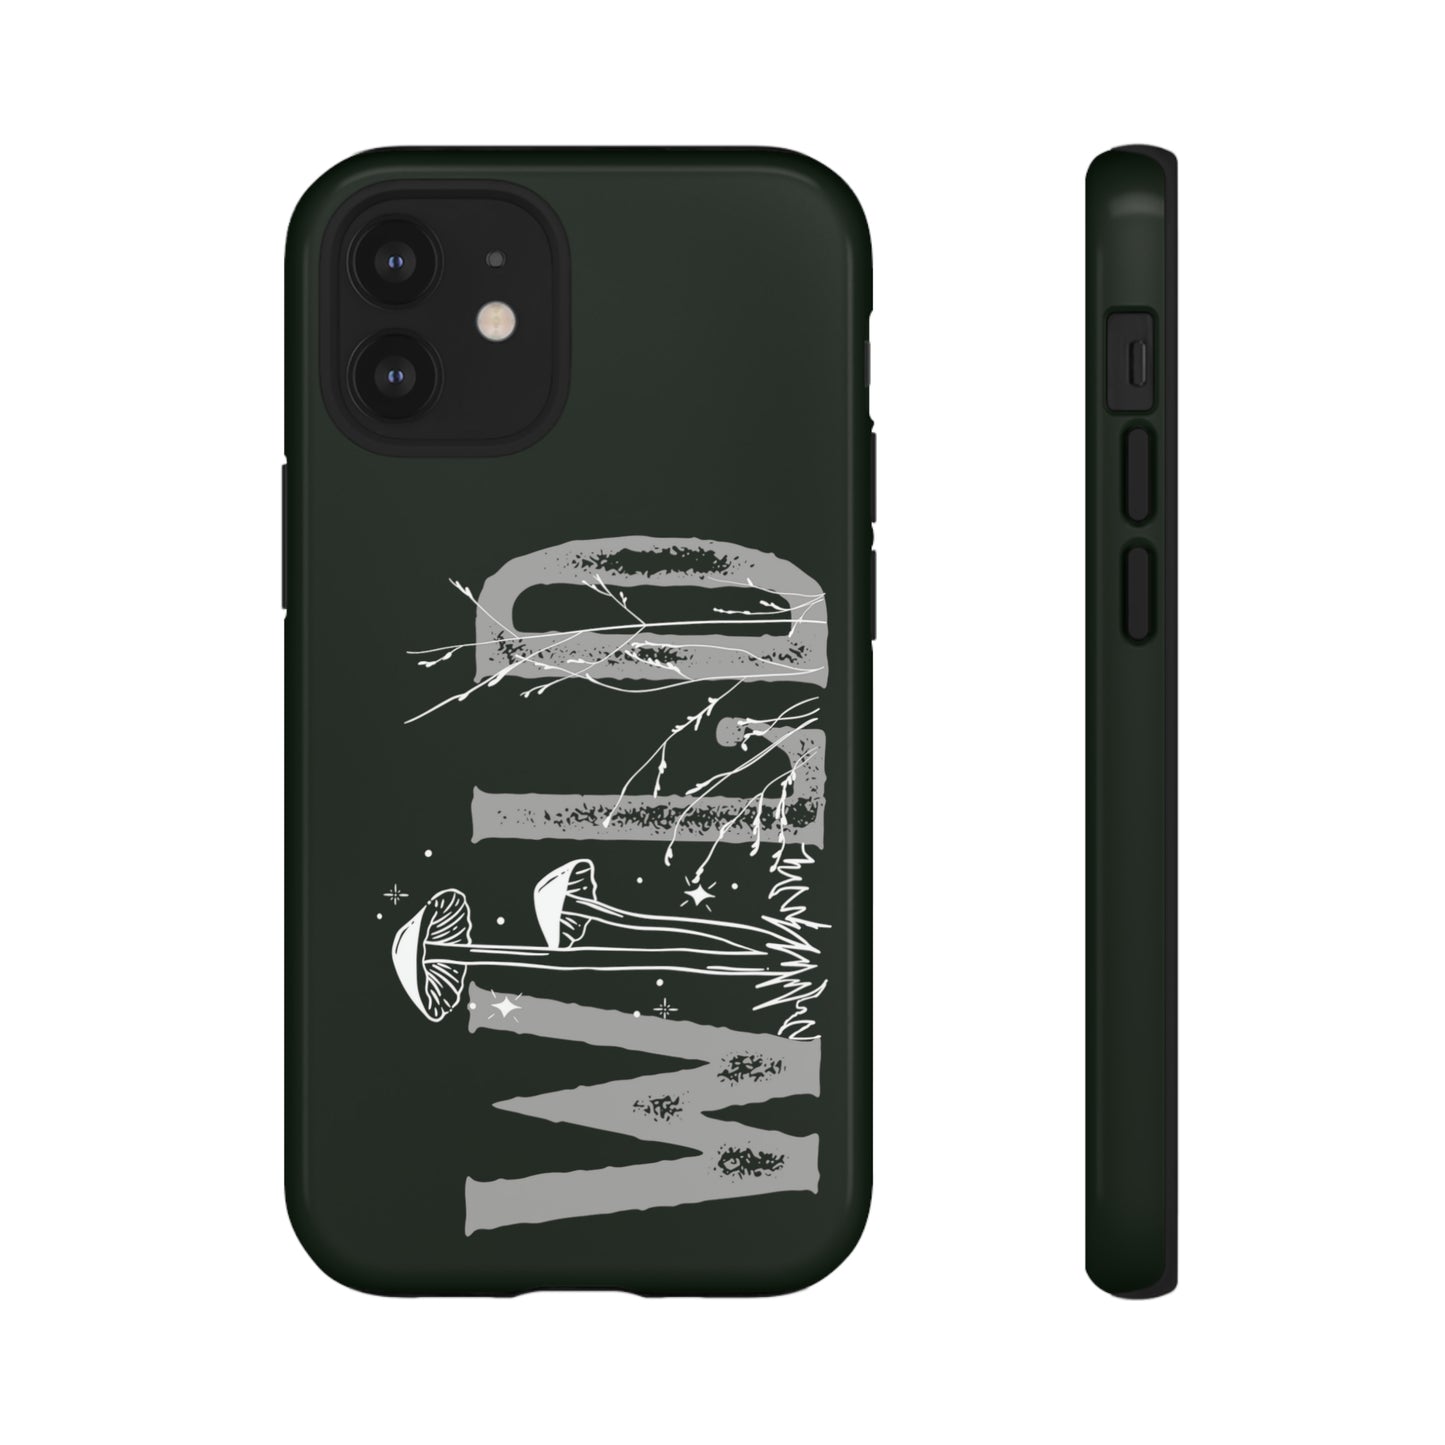 Wild Mushroom Phone Case for iPhones and Androids